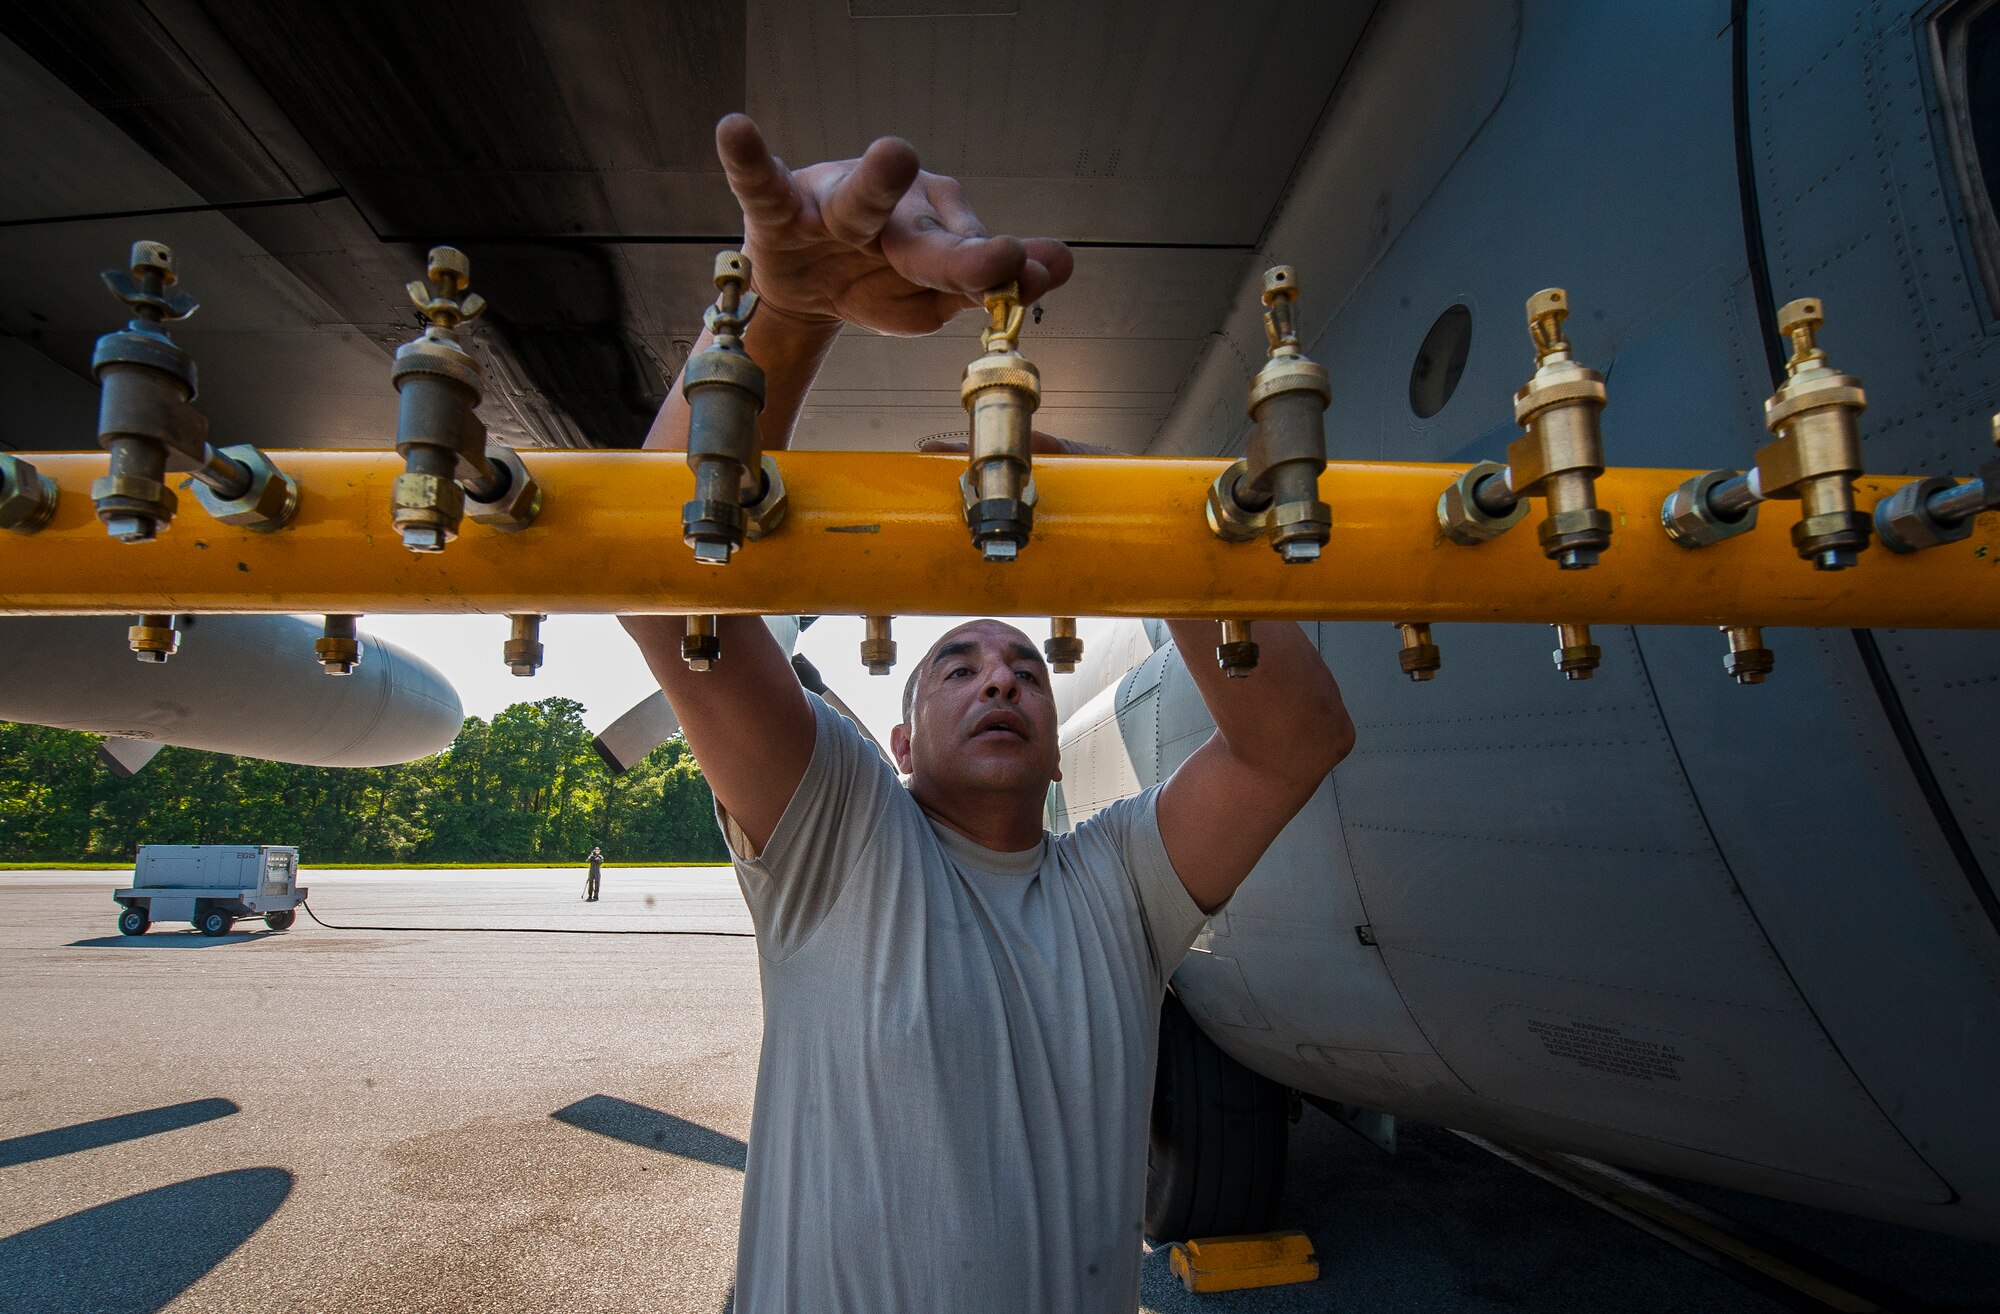 Master Sgt. Steven Feliz, 910th Airlift Wing spray maintainer, Youngstown Air Reserve Station, Ohio, opens the nozzles of a Modular Aerial Spray System on a C-130 Hercules June 15, 2013, at Joint Base Charleston – Air Base, S.C. Spraying for mosquitos was conducted over the JB Charleston – Weapons Station. The MASS is maintained by the 910th AW support personnel. (U.S. Air Force photo/Senior Airman Dennis Sloan)